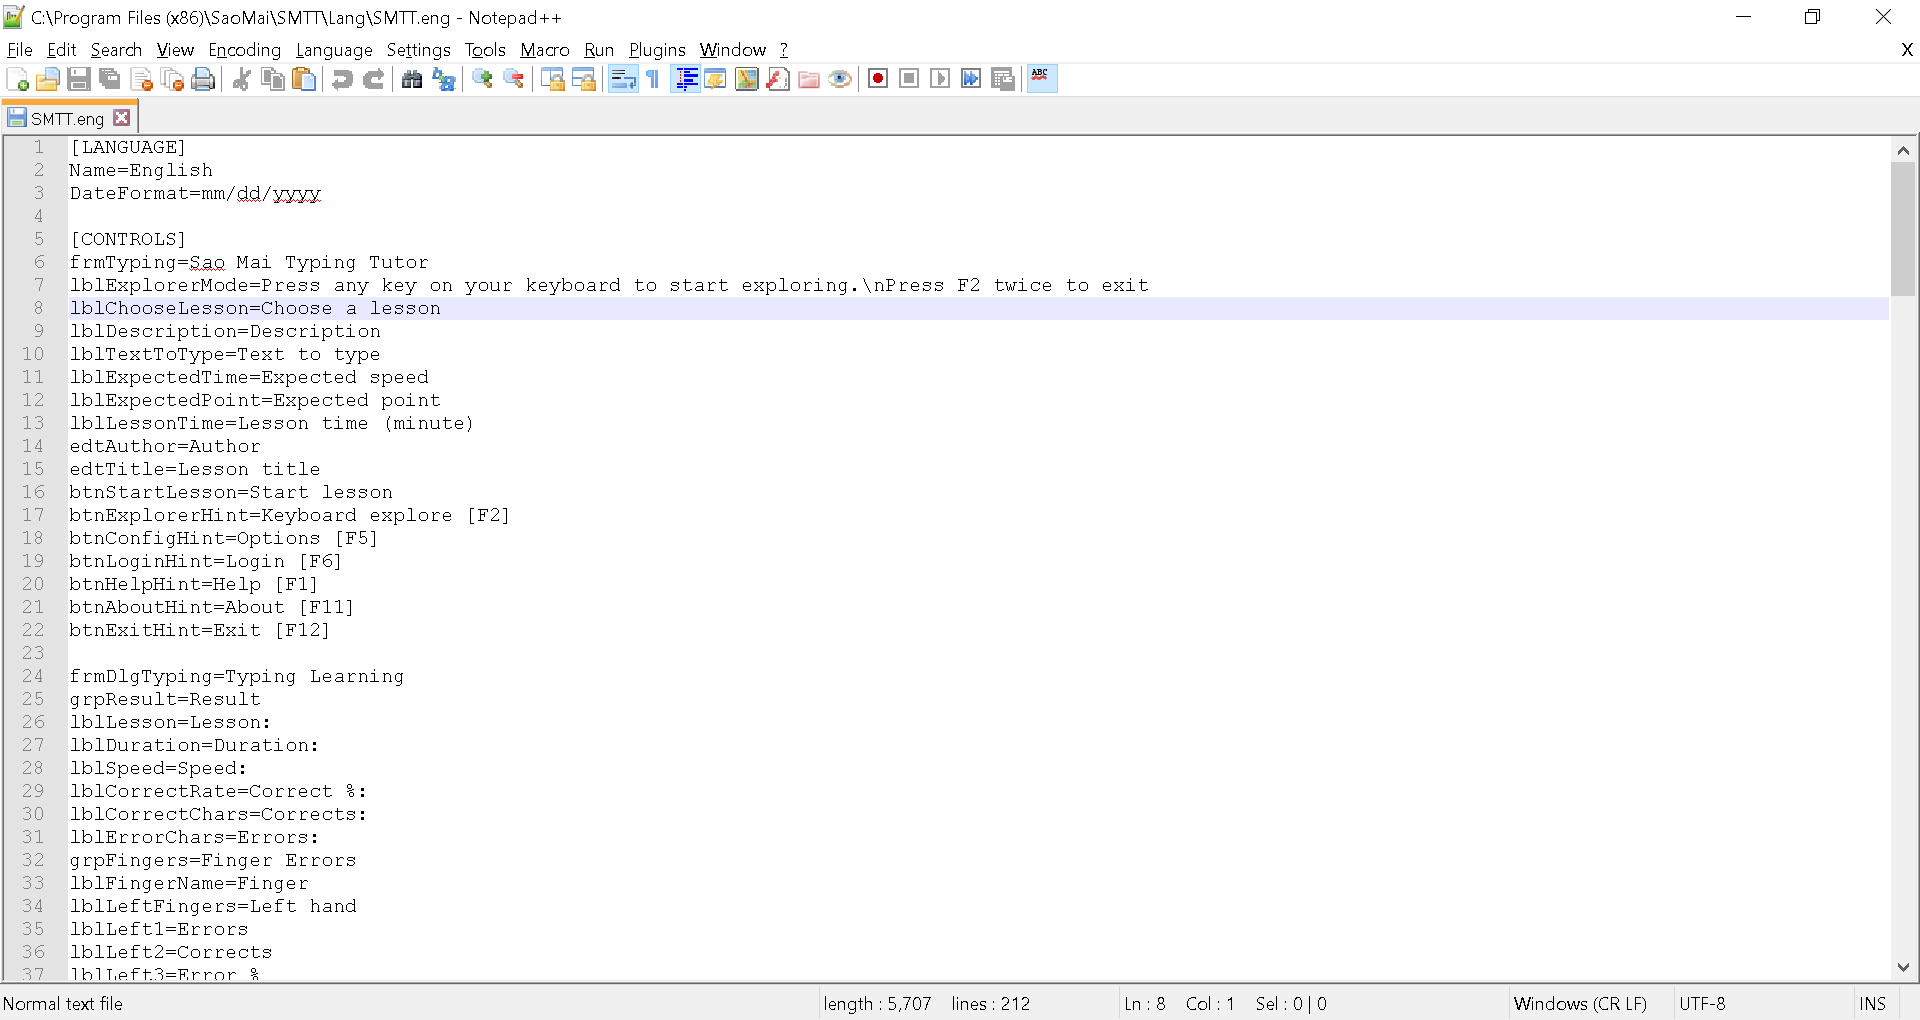 SMTT.eng language file opened in Notepad++ text editor